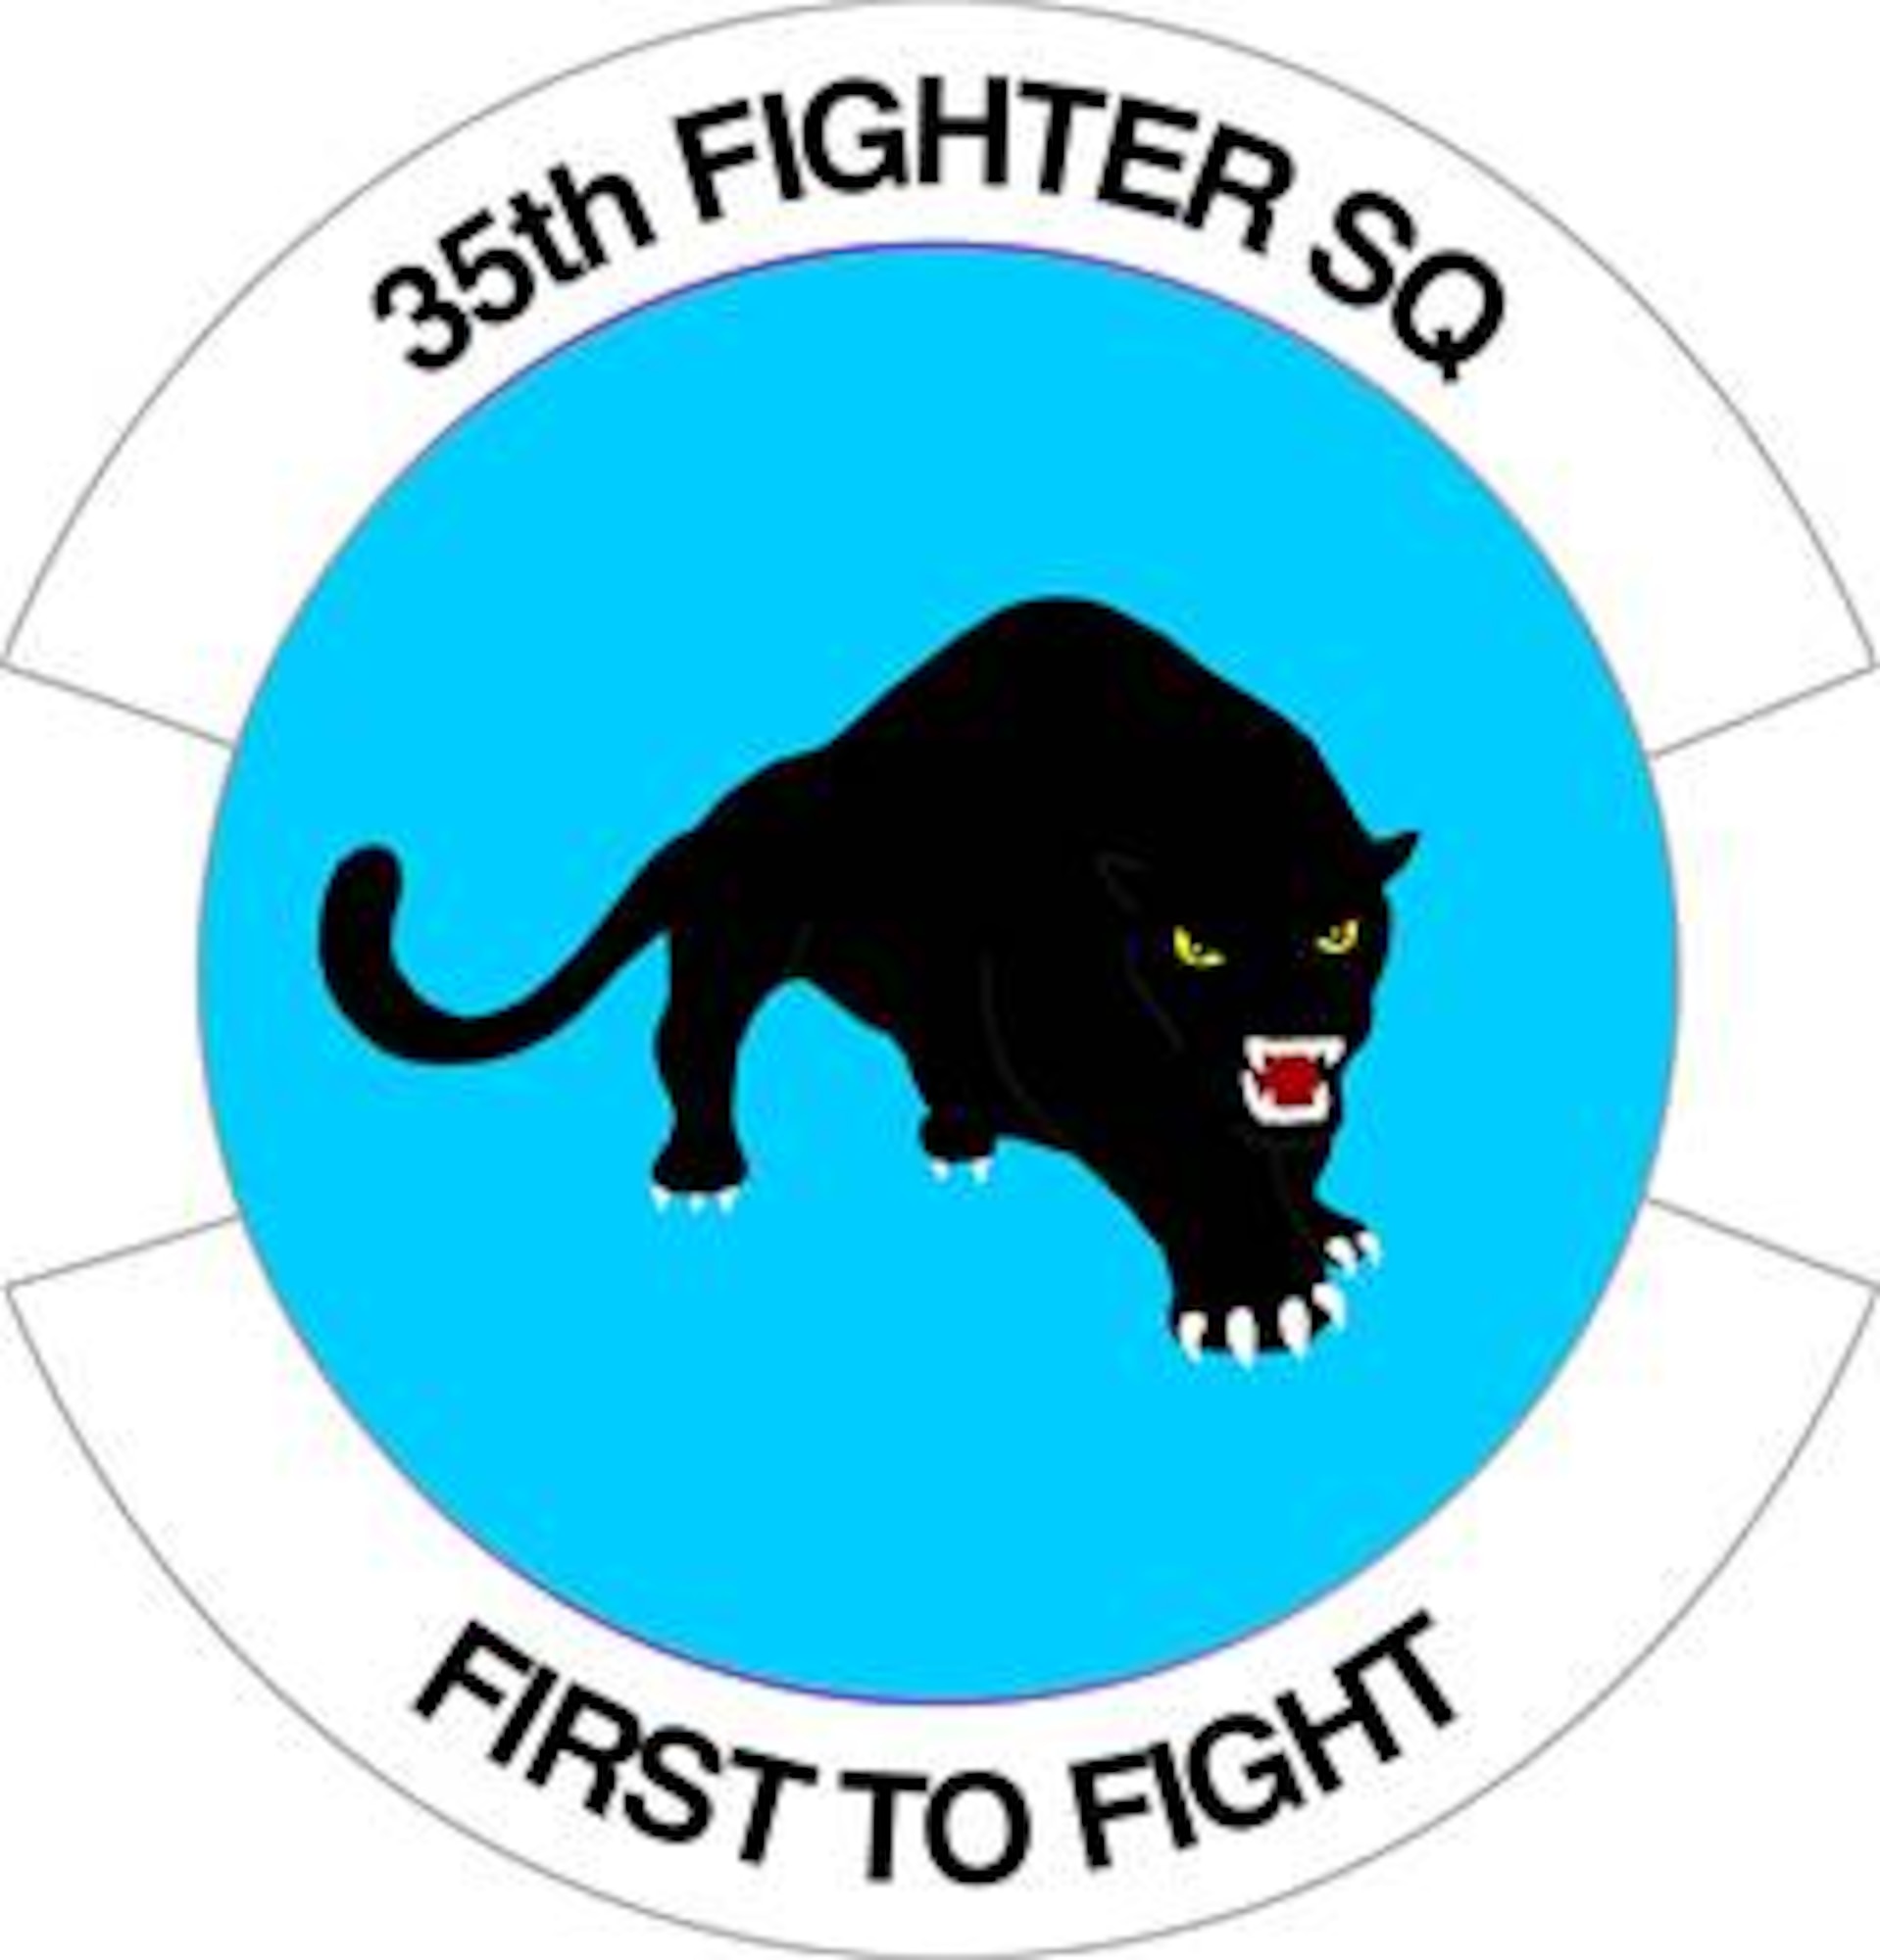 35th Fighter Squadron "Pantons": Current Shield. 